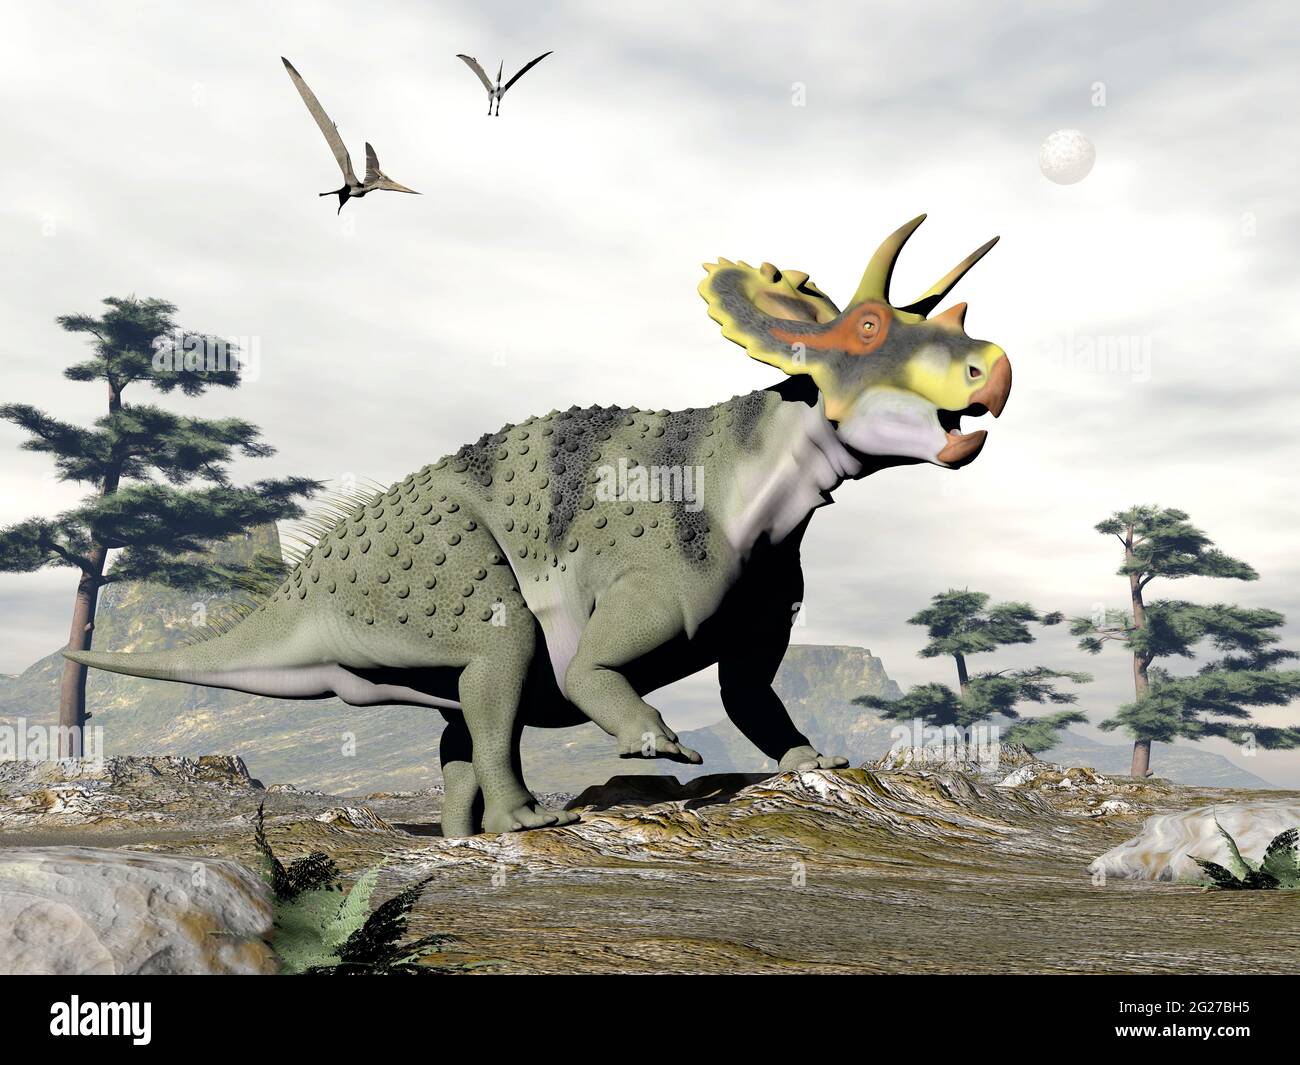 Anchiceratops dinosaur walking in the nature. Stock Photo